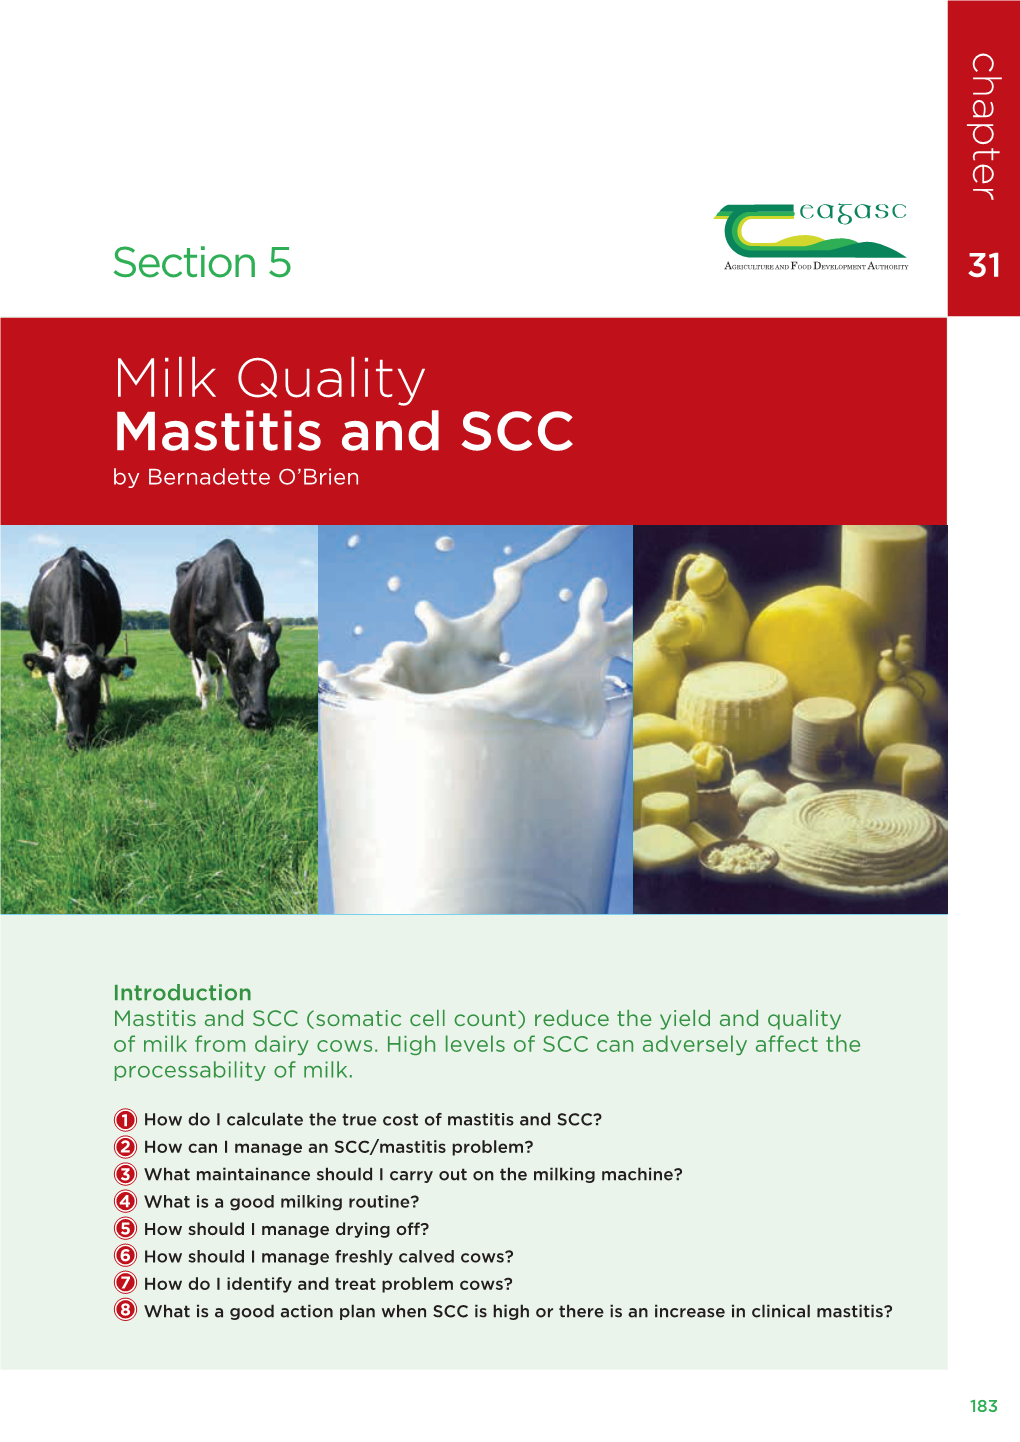 Milk Quality Mastitis and SCC by Bernadette O’Brien